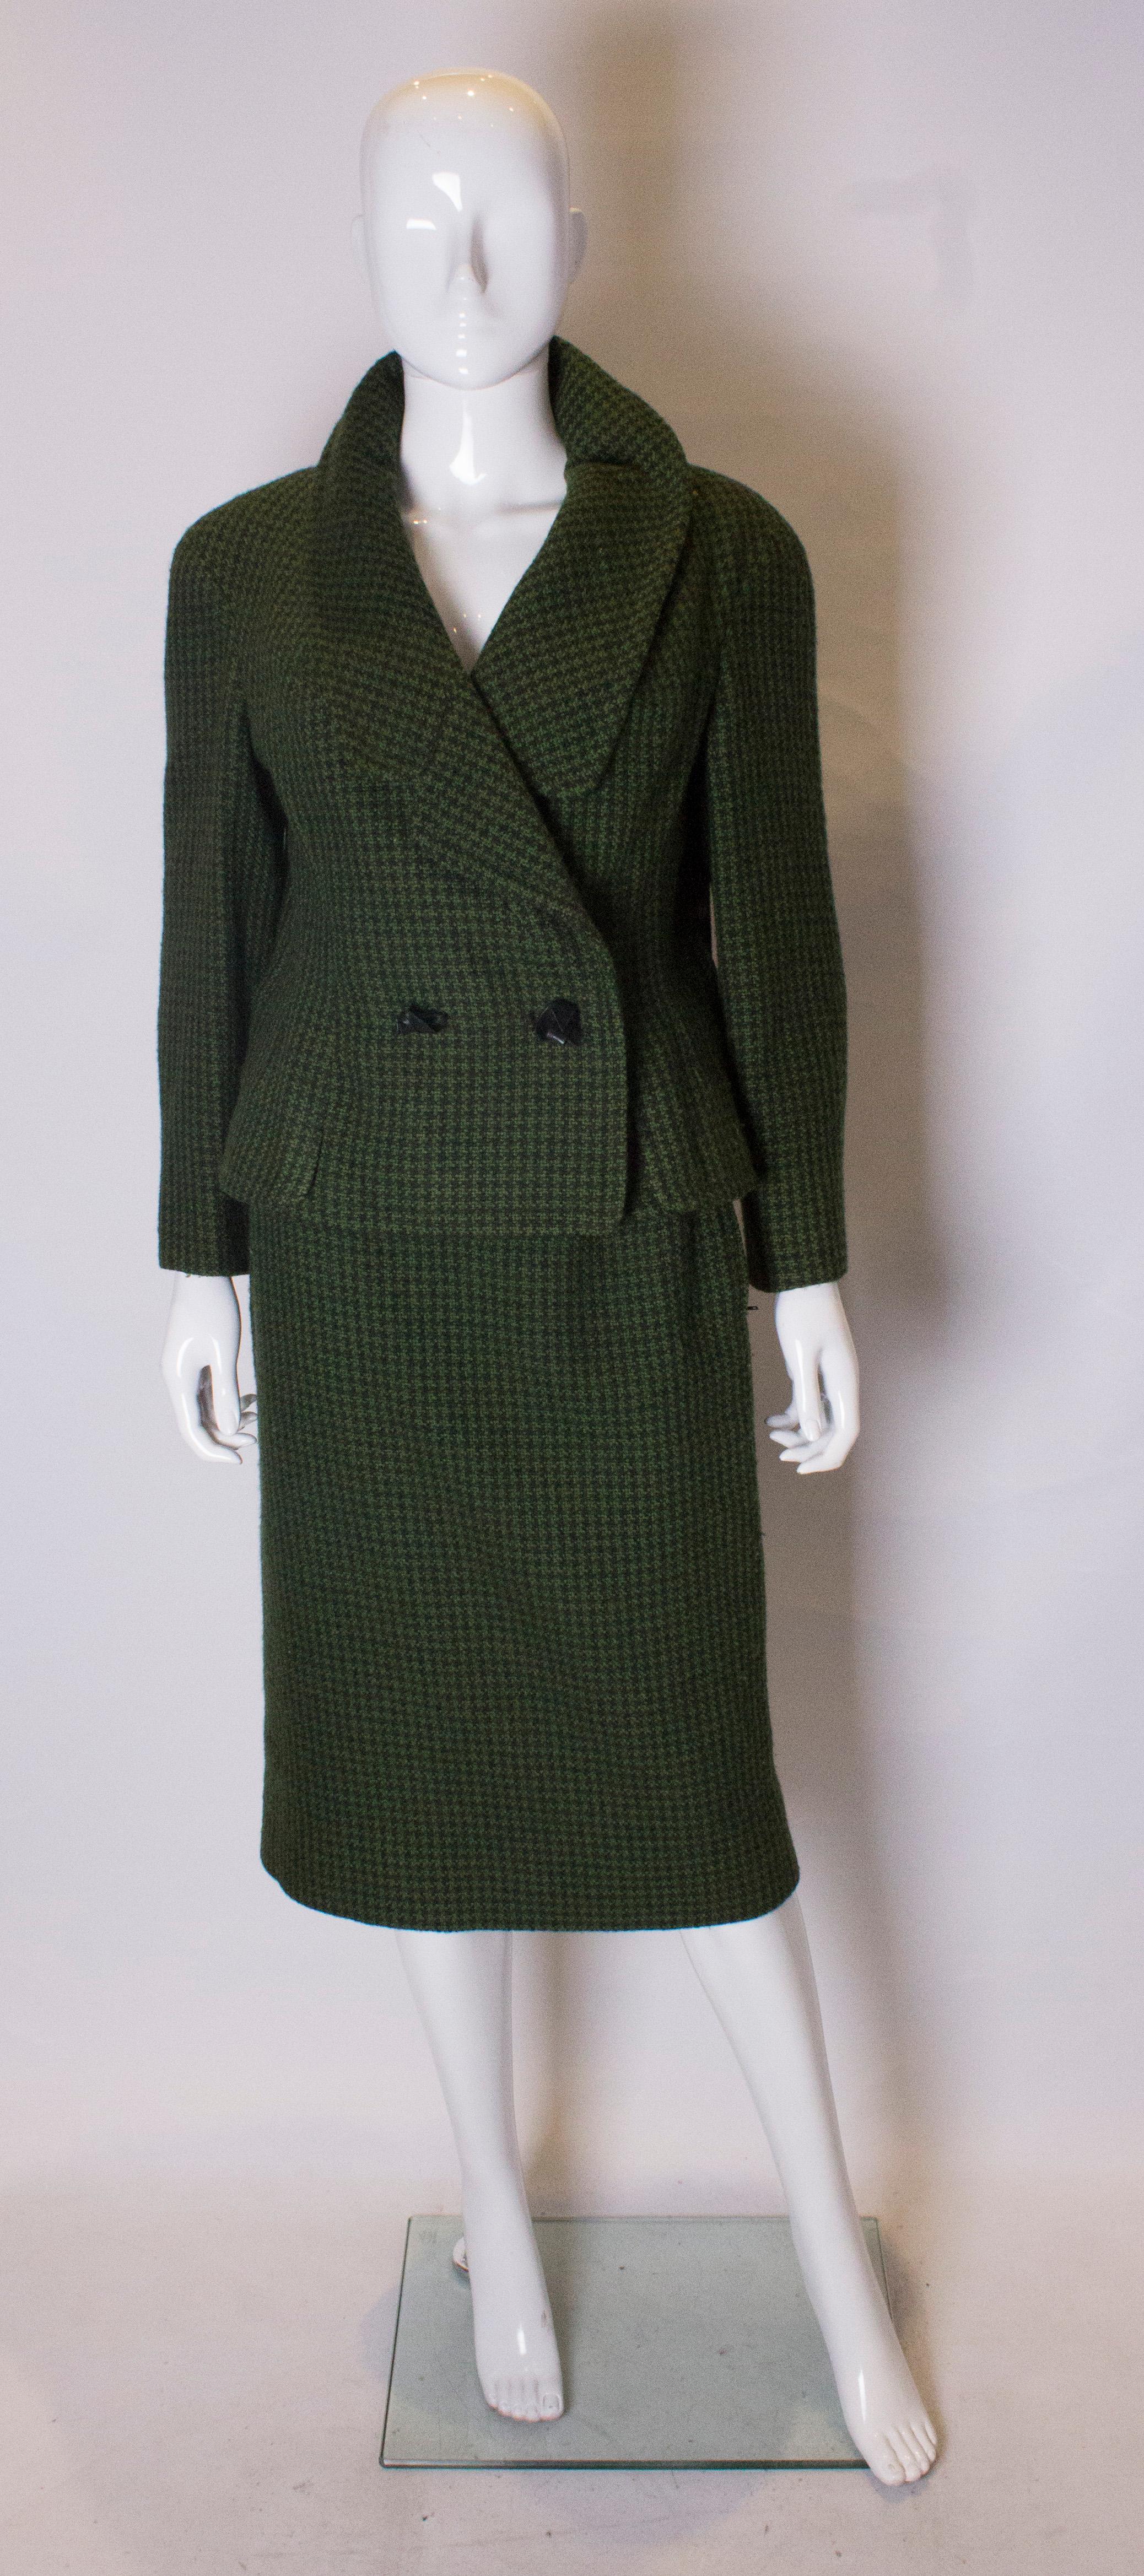 A charming vintage suit by Hardy Amies, ready to wear line. The jacket has an attractive cut away collar and fastens with leather ties,n the skirt has a side zip and is fully lined.
Jacket : bust 38'', length 21'', skirt waist 27'', length 28''